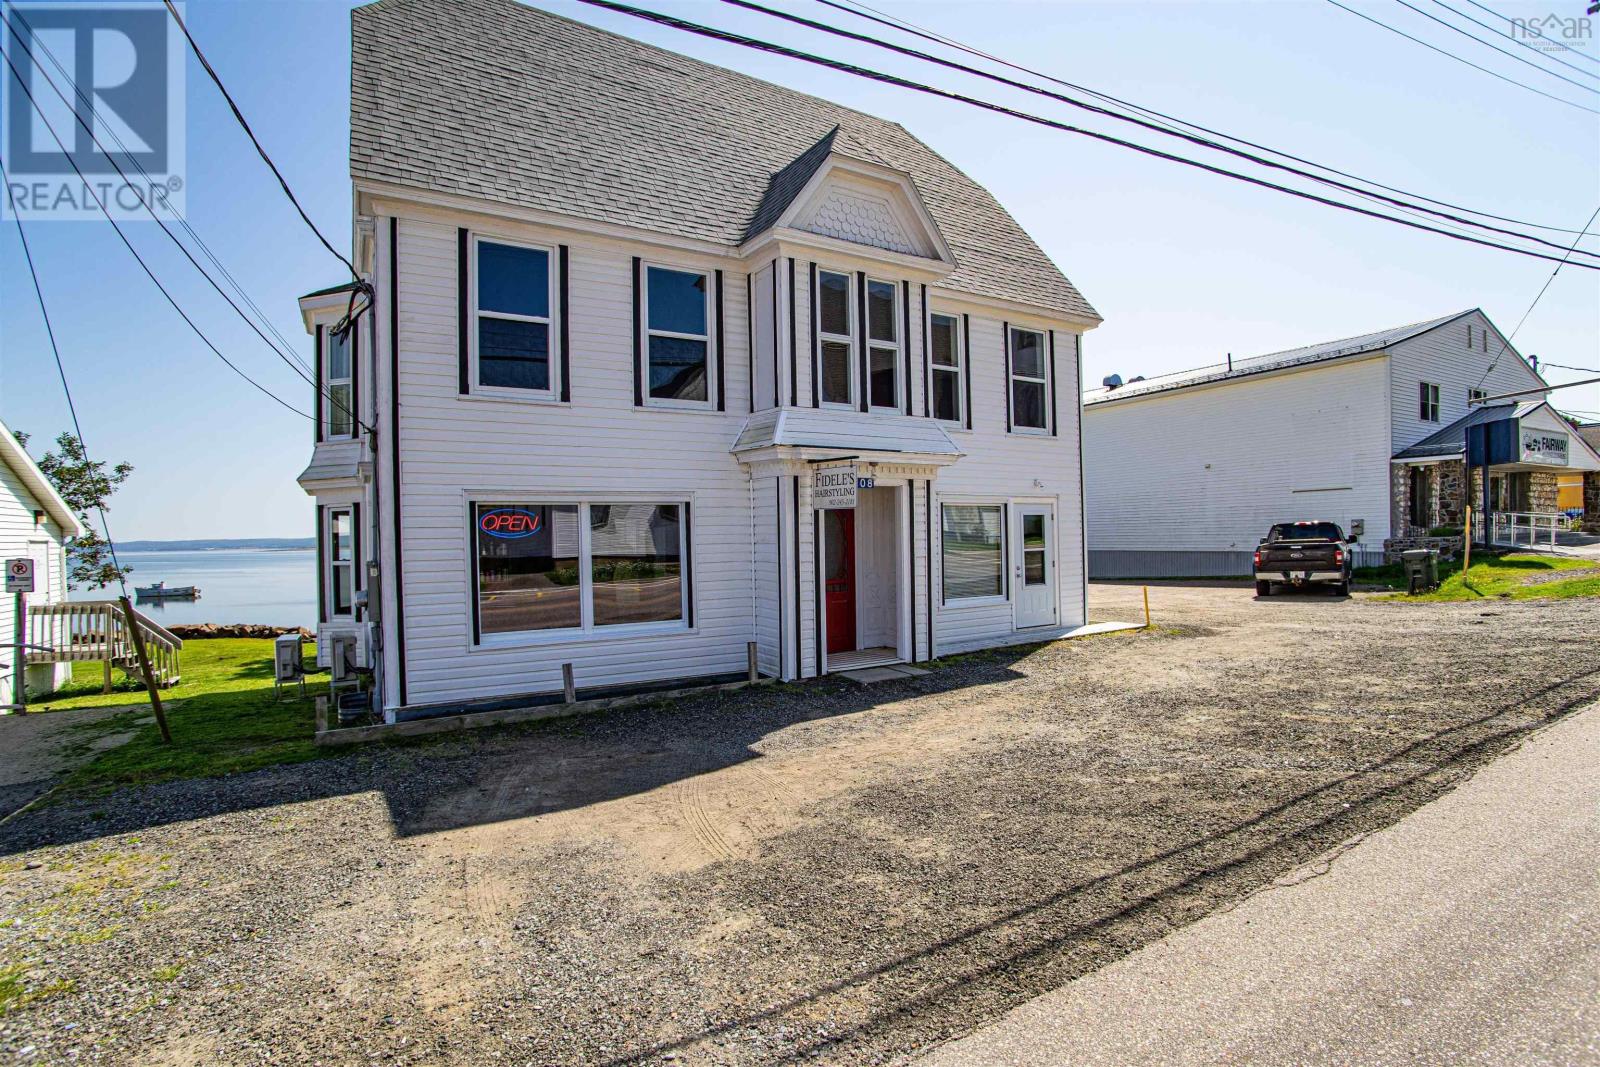 108 Montague Row located in Digby, Nova Scotia